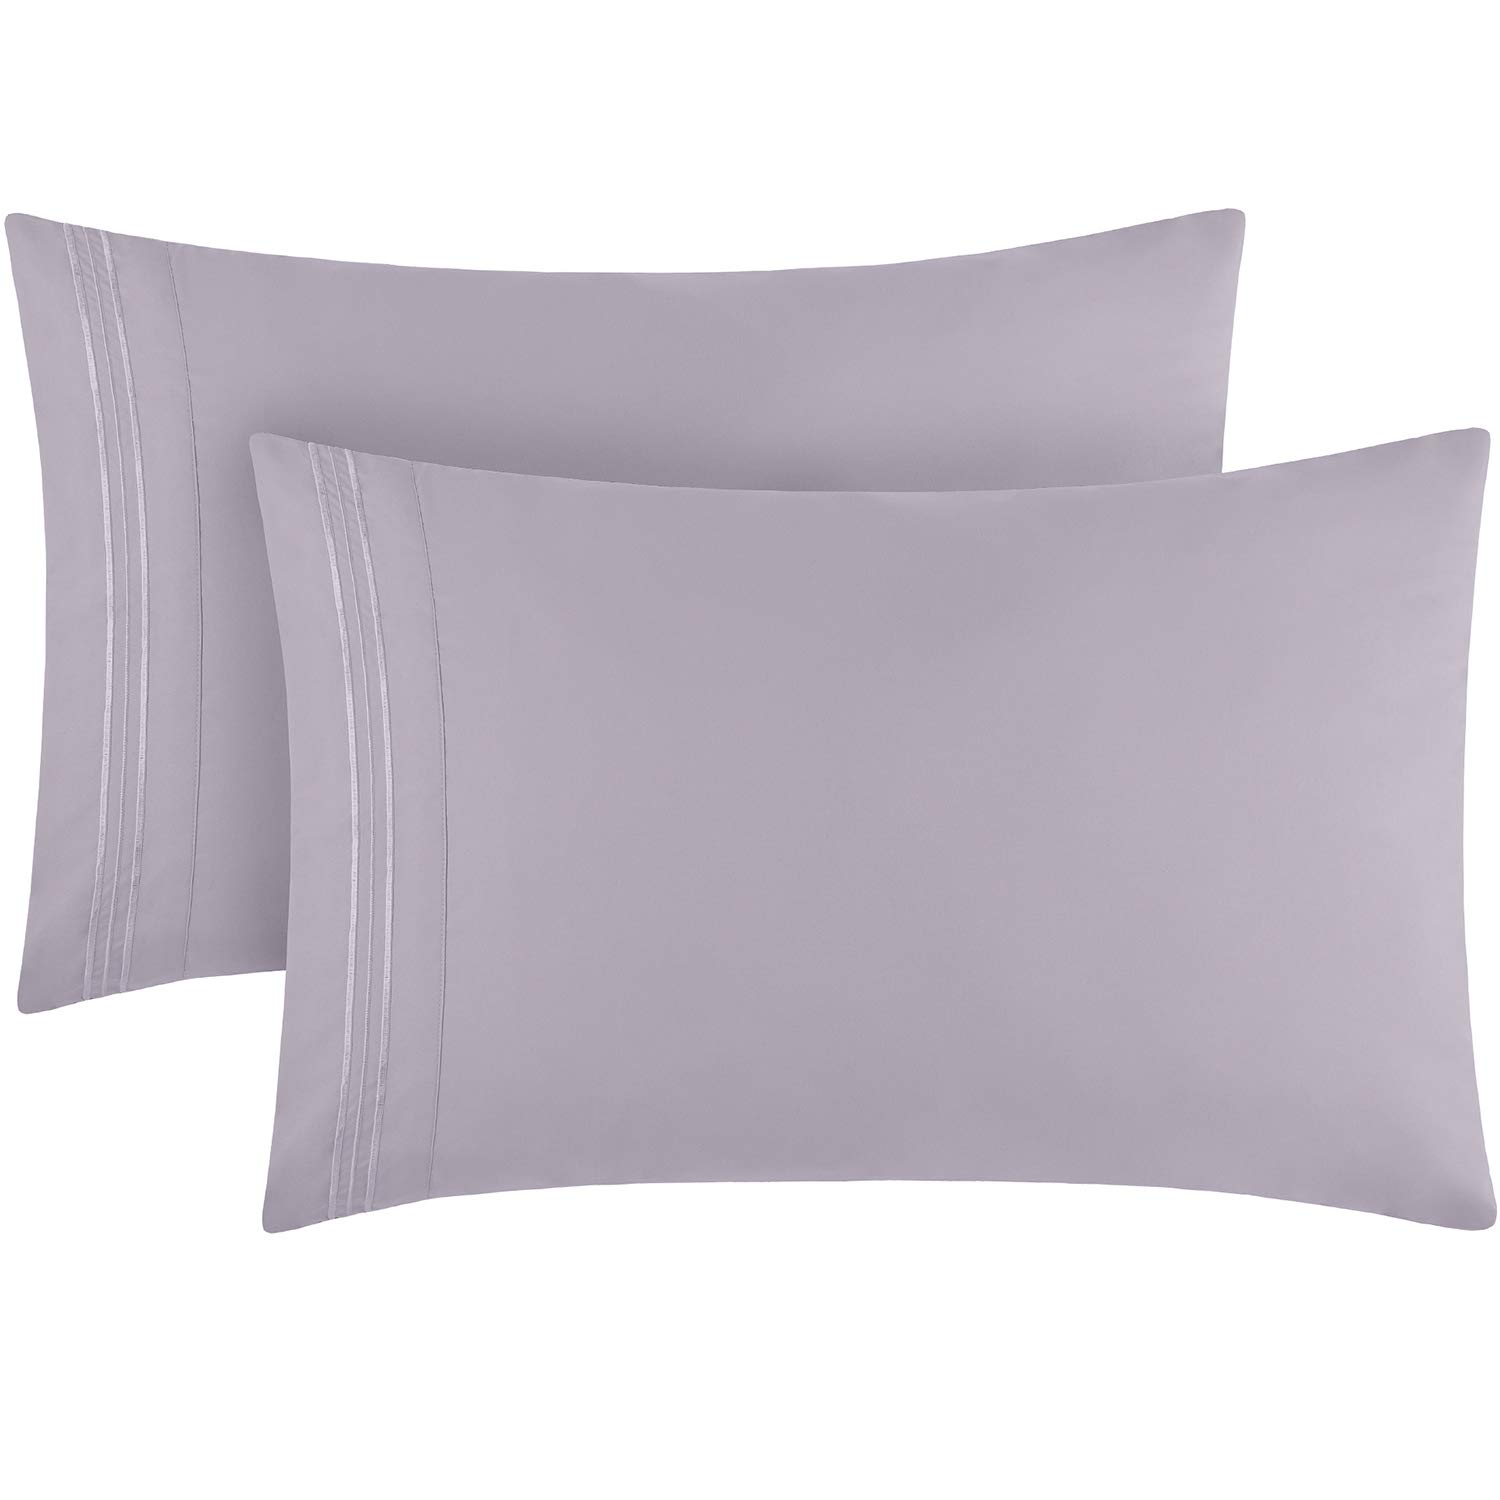 Book Cover Mellanni King Size Pillow Cases 2 Pack - Iconic Collection Pillowcases - Hotel Luxury, Extra Soft, Cooling Pillow Covers - Wrinkle, Fade, Stain Resistant (2 PC King 20